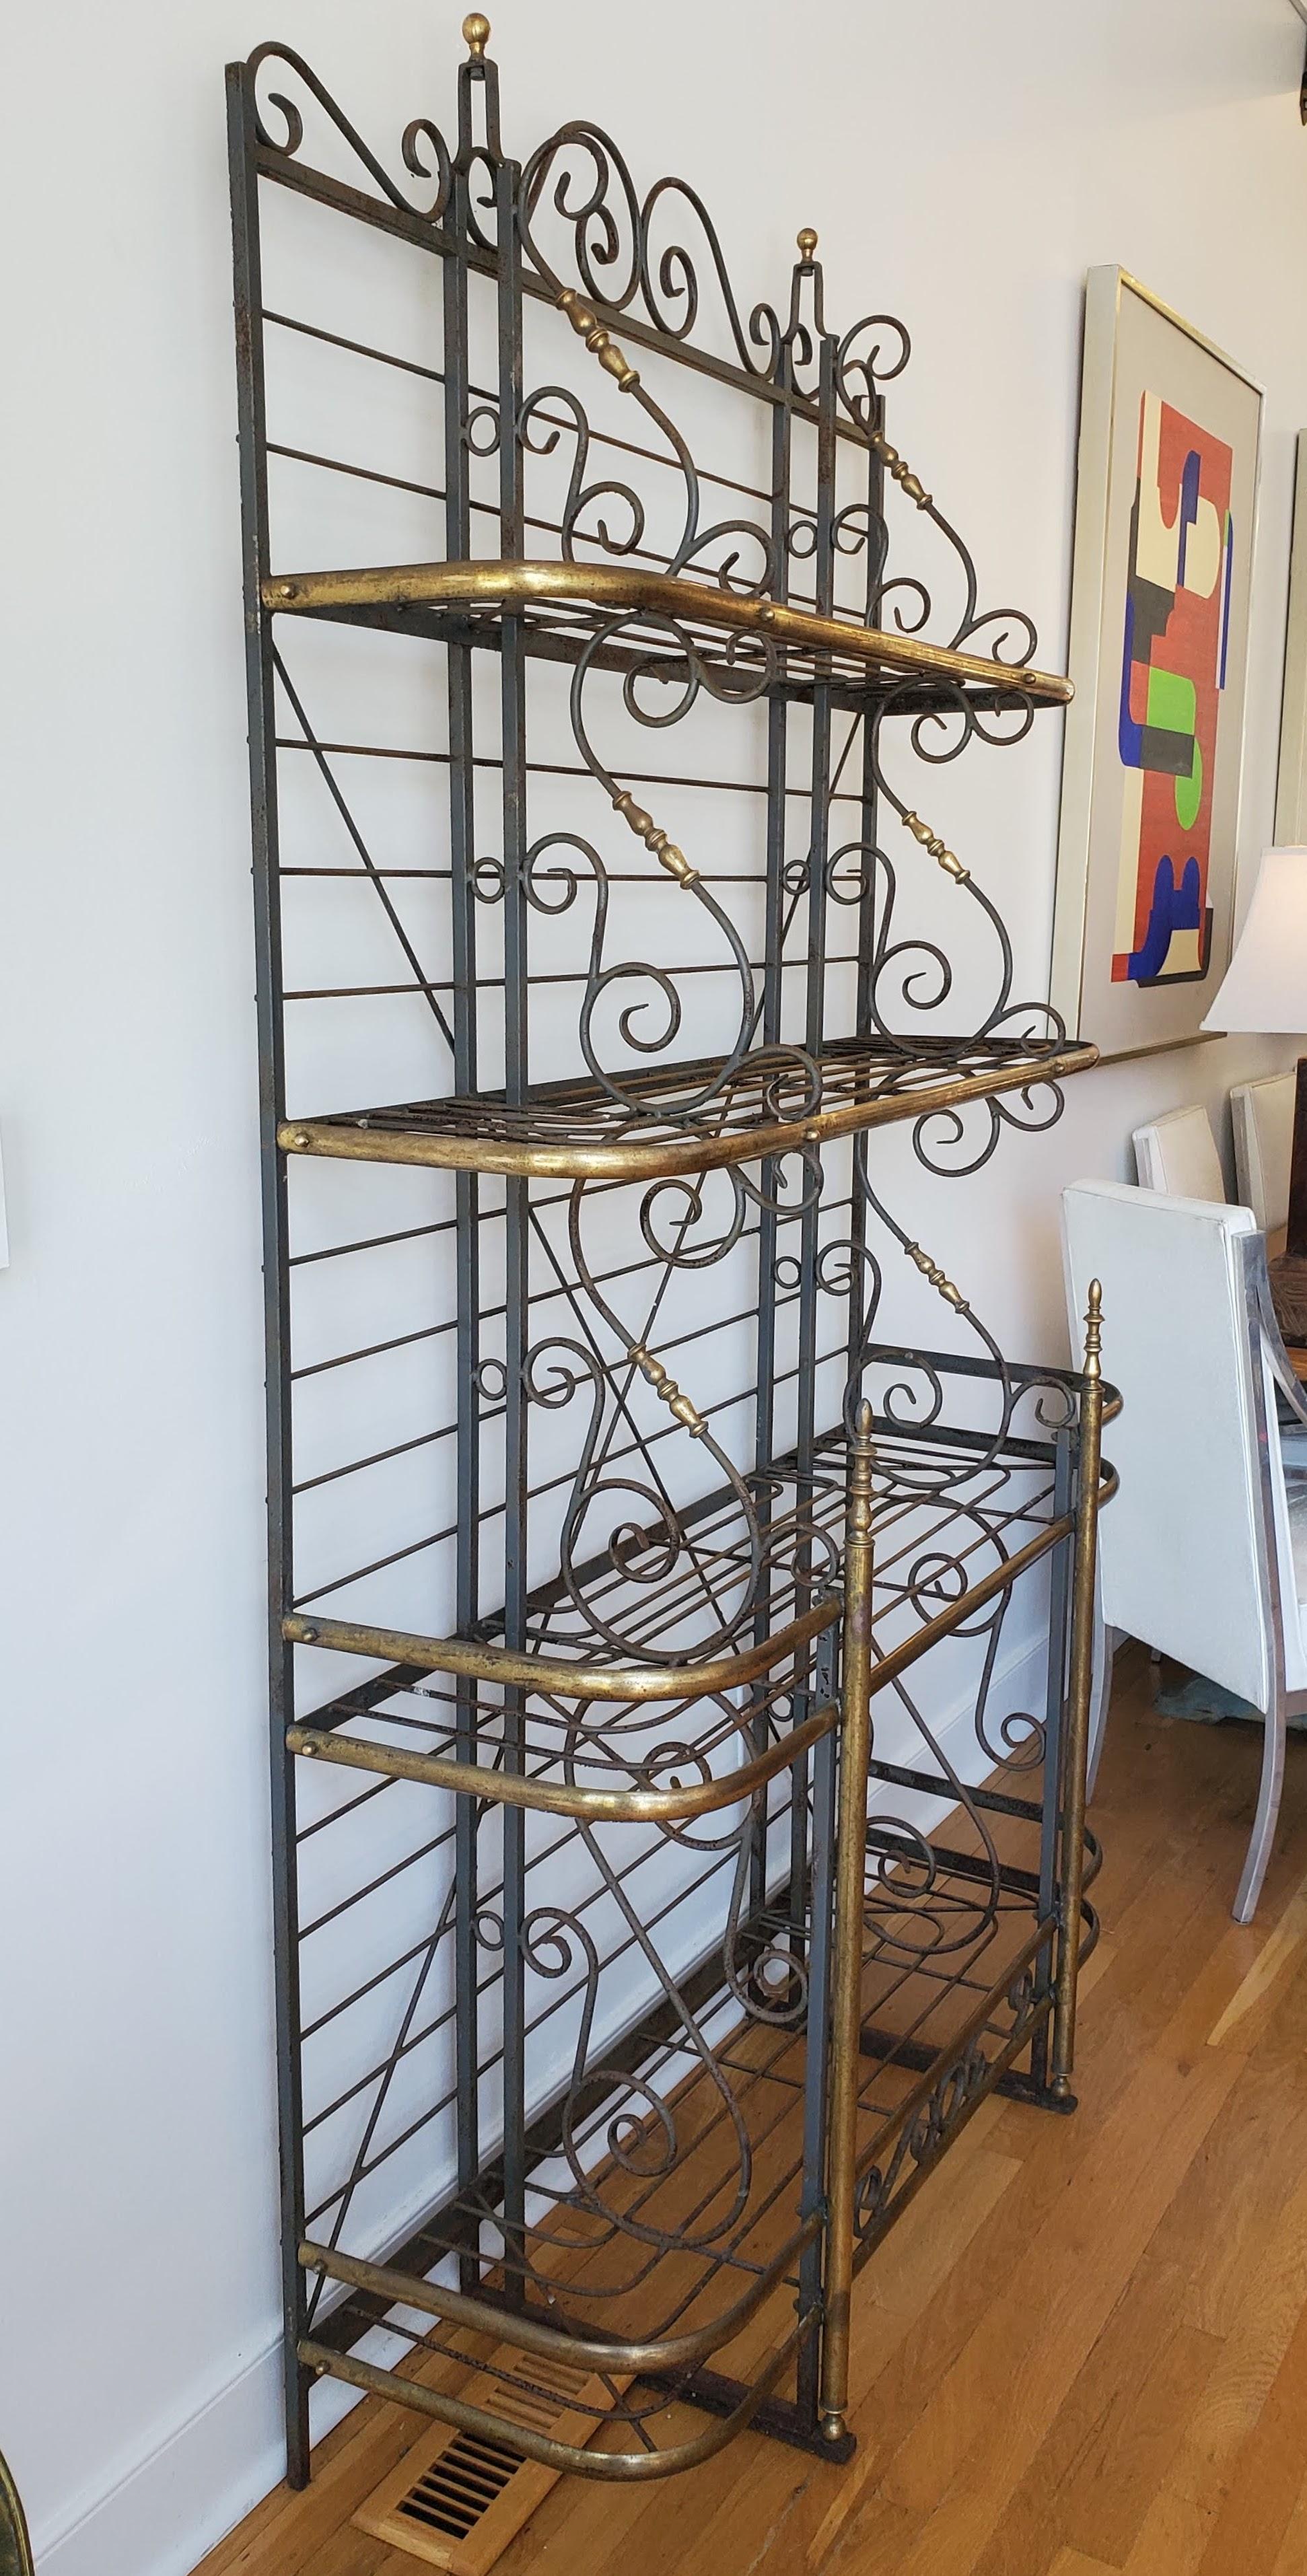 This large 19th century french provincial baker’s rack will make an excellent addition to the at home chef's kitchen. Plenty of space for all those knick-knacks and kitchen gadgets as this rack is 7 ft tall. Made of scrolled steel with decorative